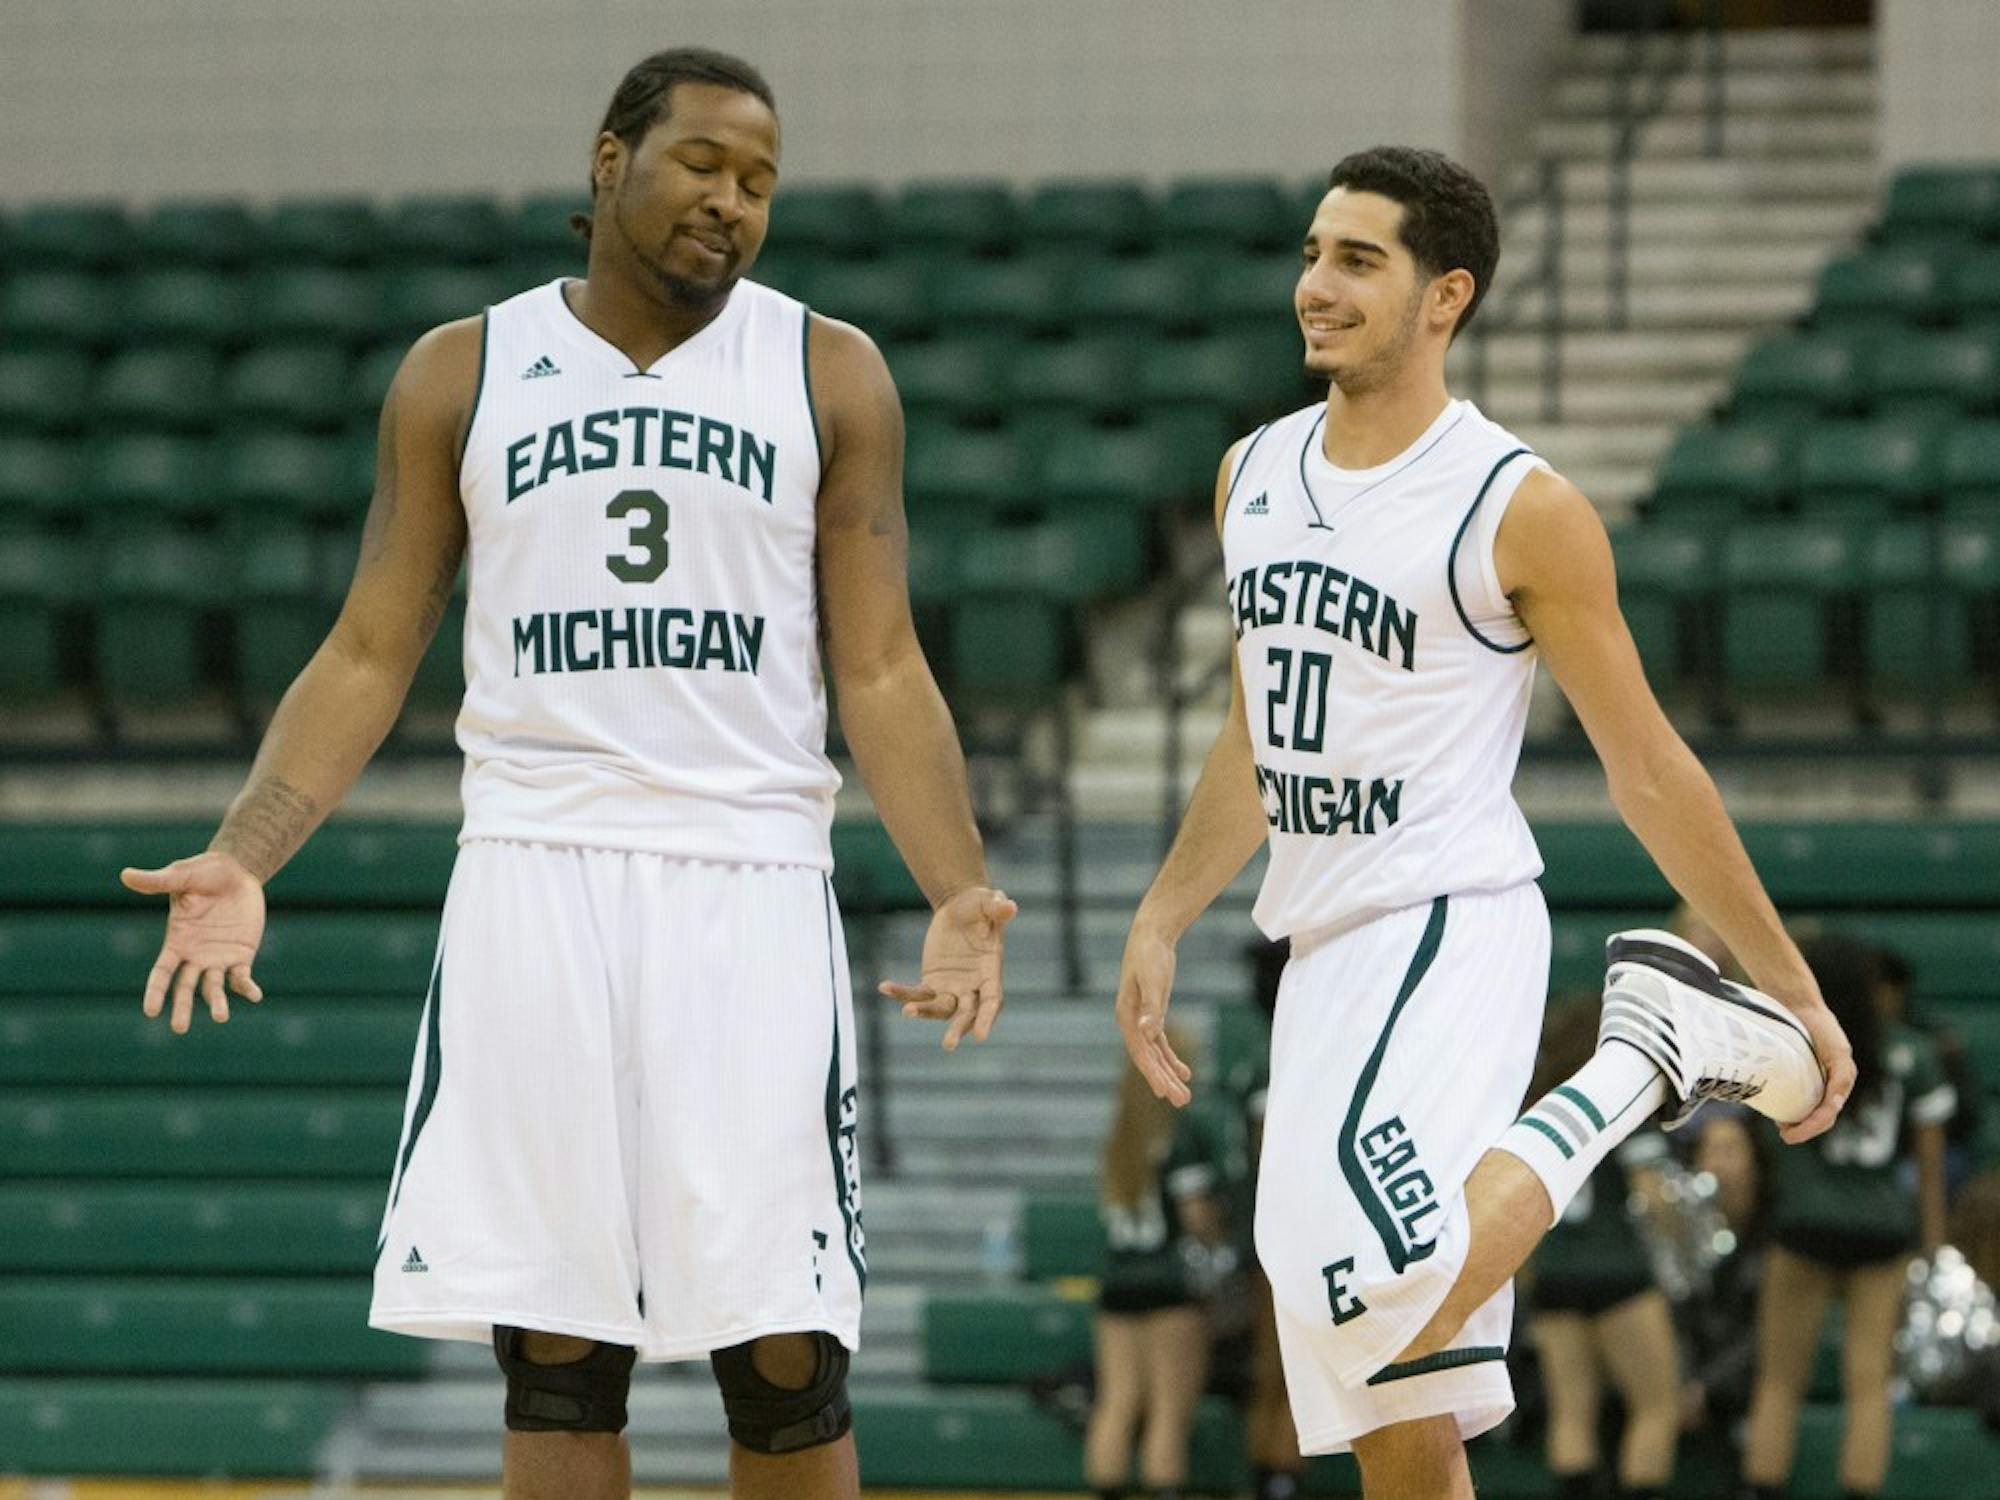 	Hughley (left) is averaging 1.3 points and 1.2 rebounds per game.